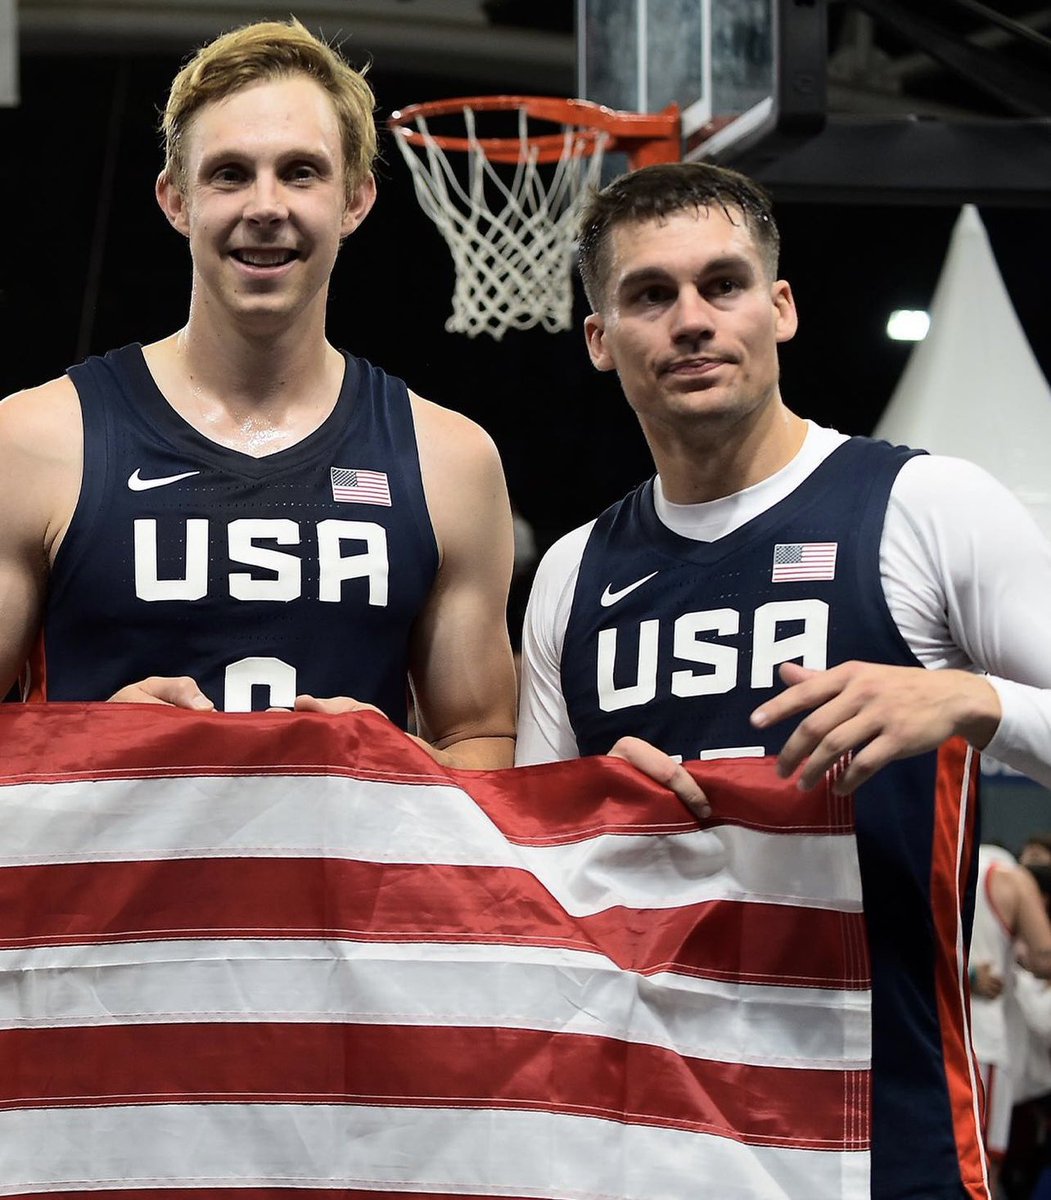 Hey! We know him! Former Moc Dylan Travis brings home Gold for 3x3 @usabasketball! Congrats Dylan! 🏅